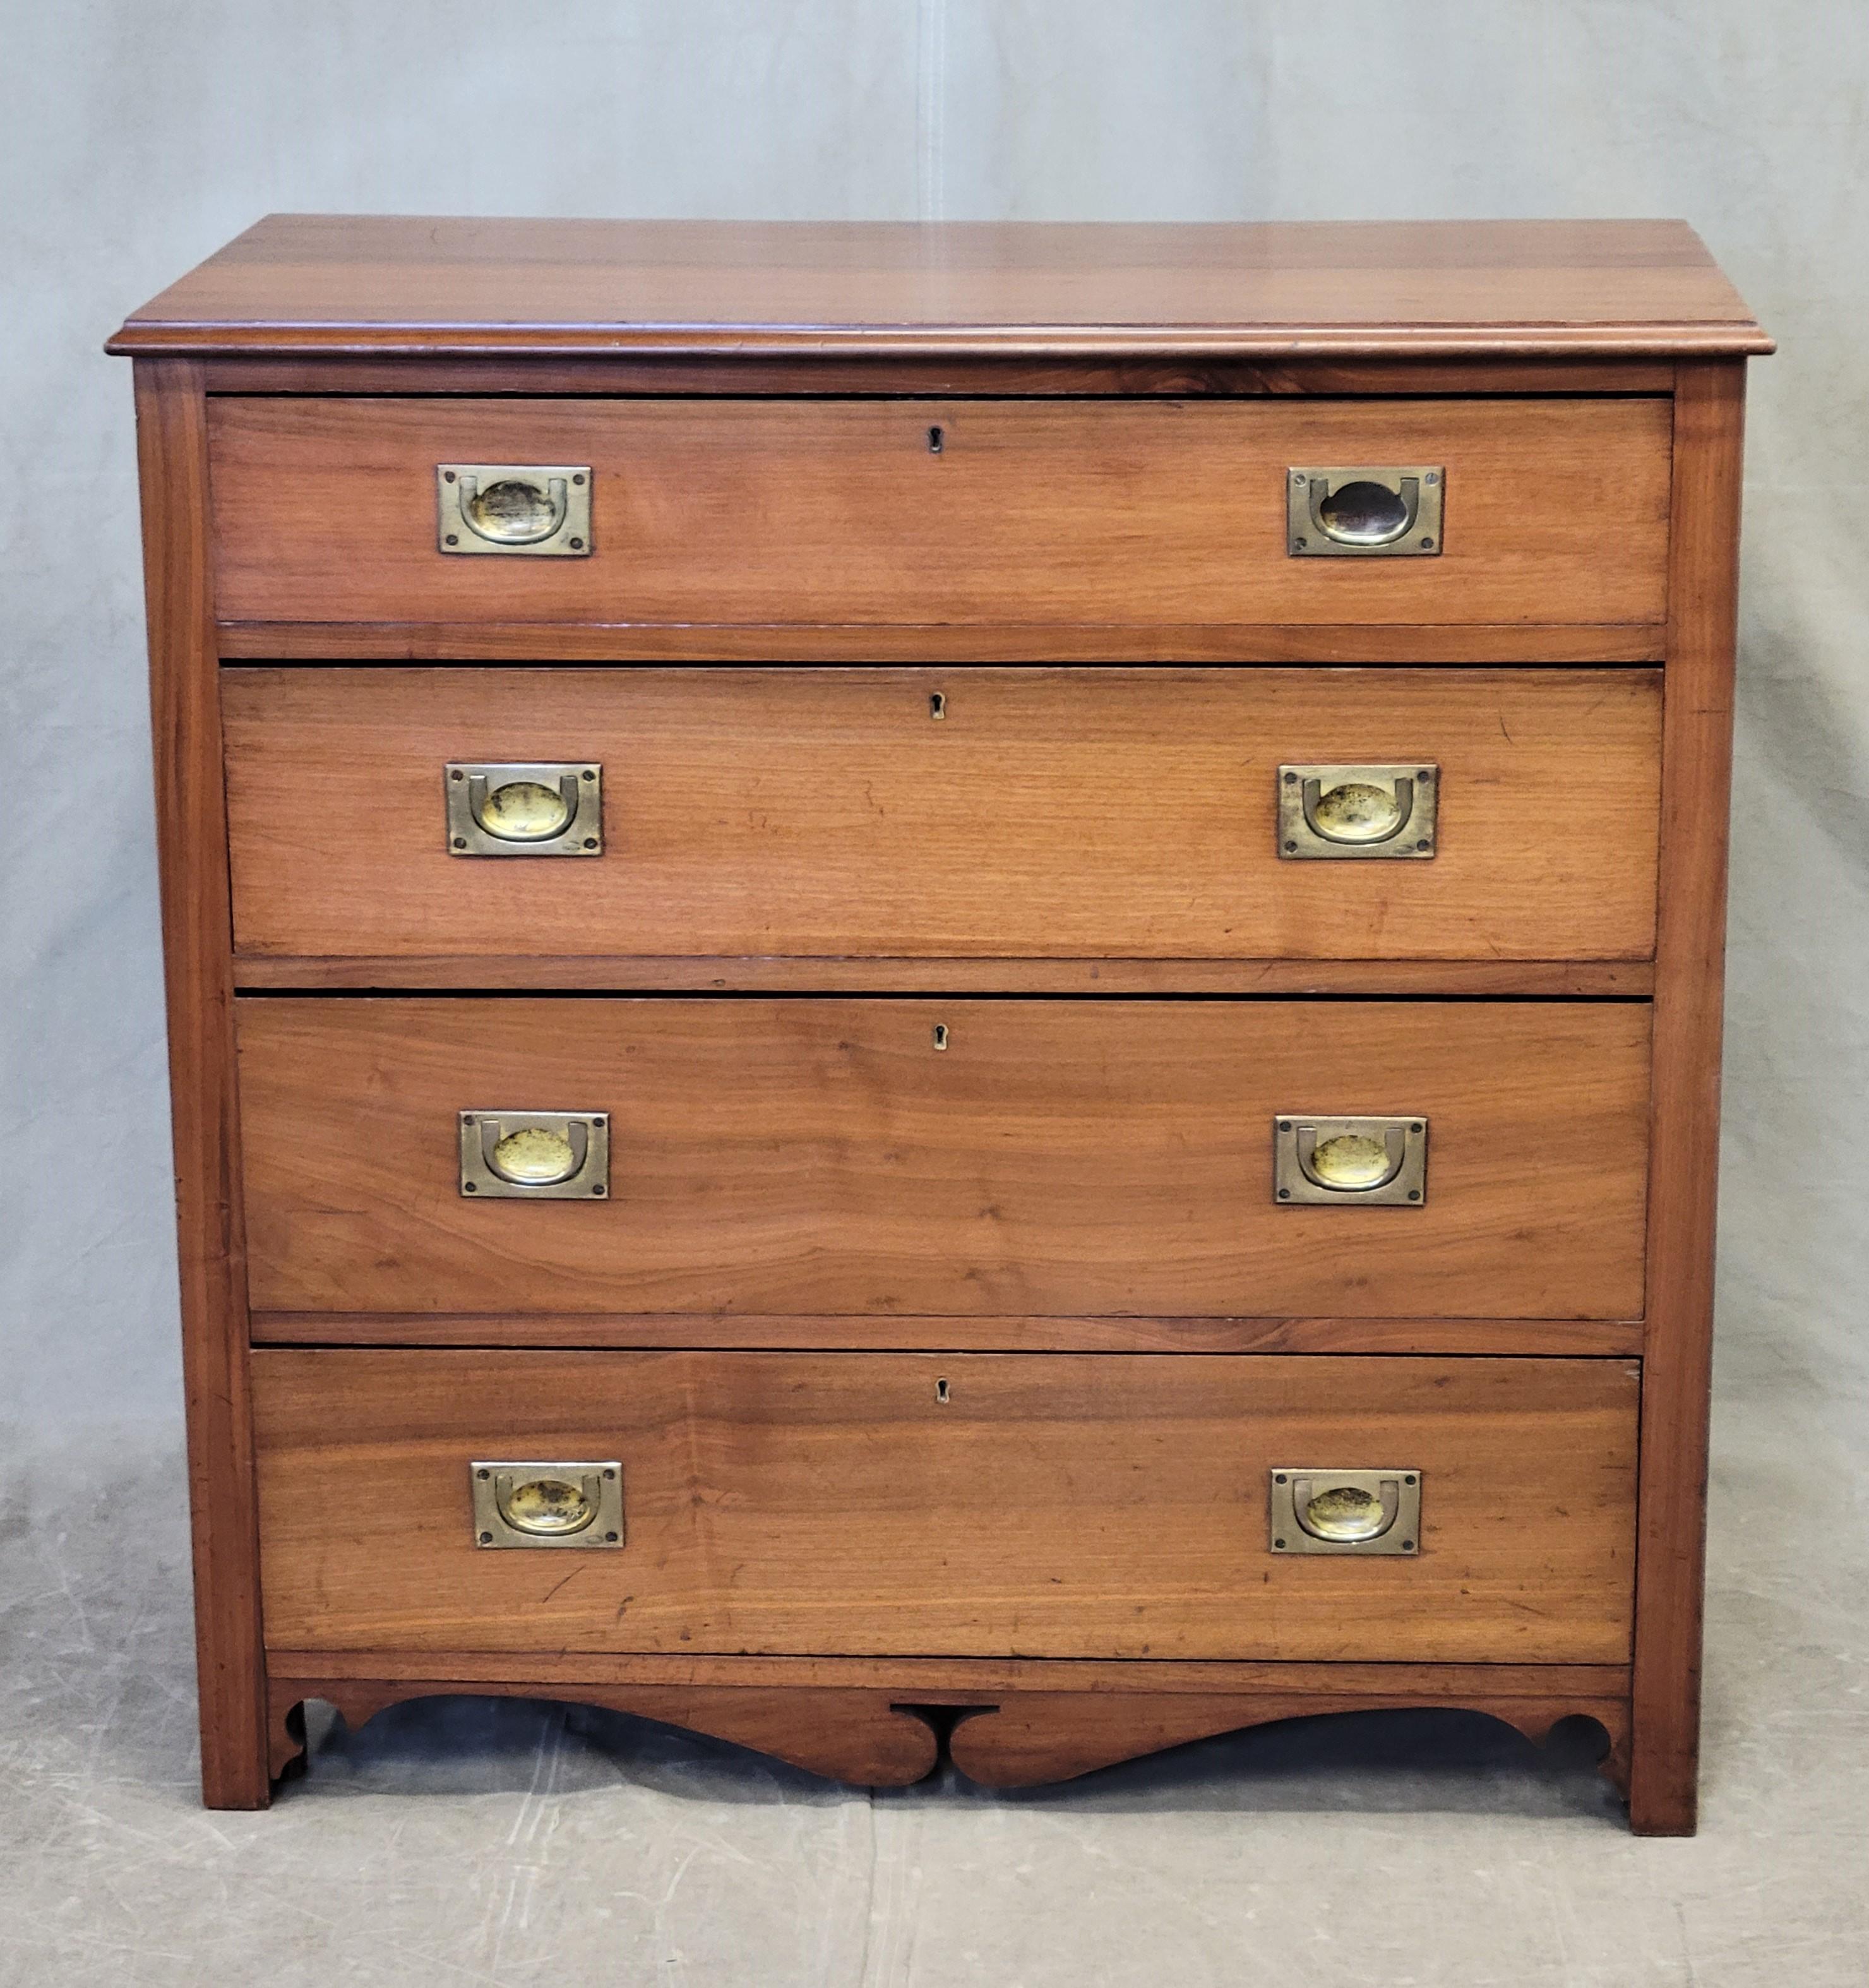 Antique Scottish or English Campaign Butler's Desk Chest of Drawers In Good Condition For Sale In Centennial, CO